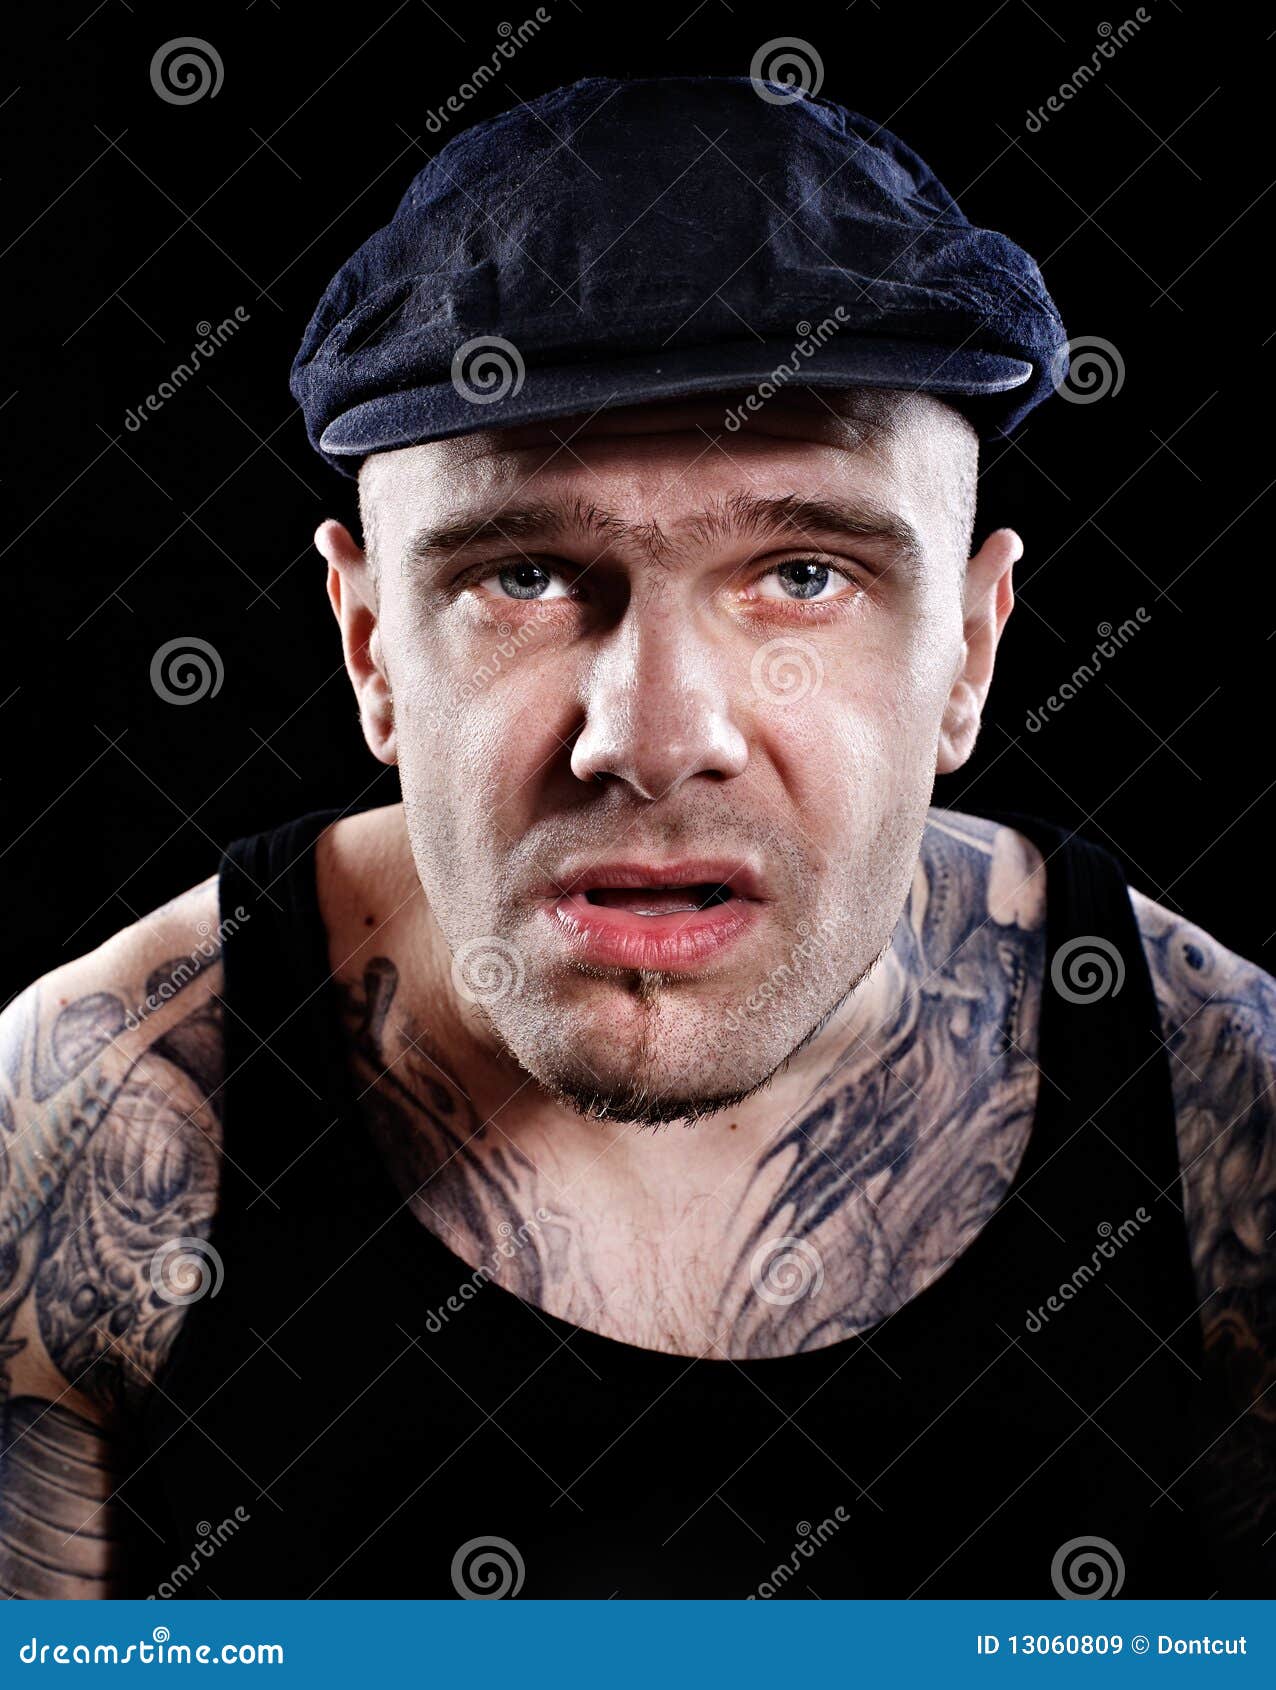 Man with tattoos stock image. Image of criminal, fear - 13060809